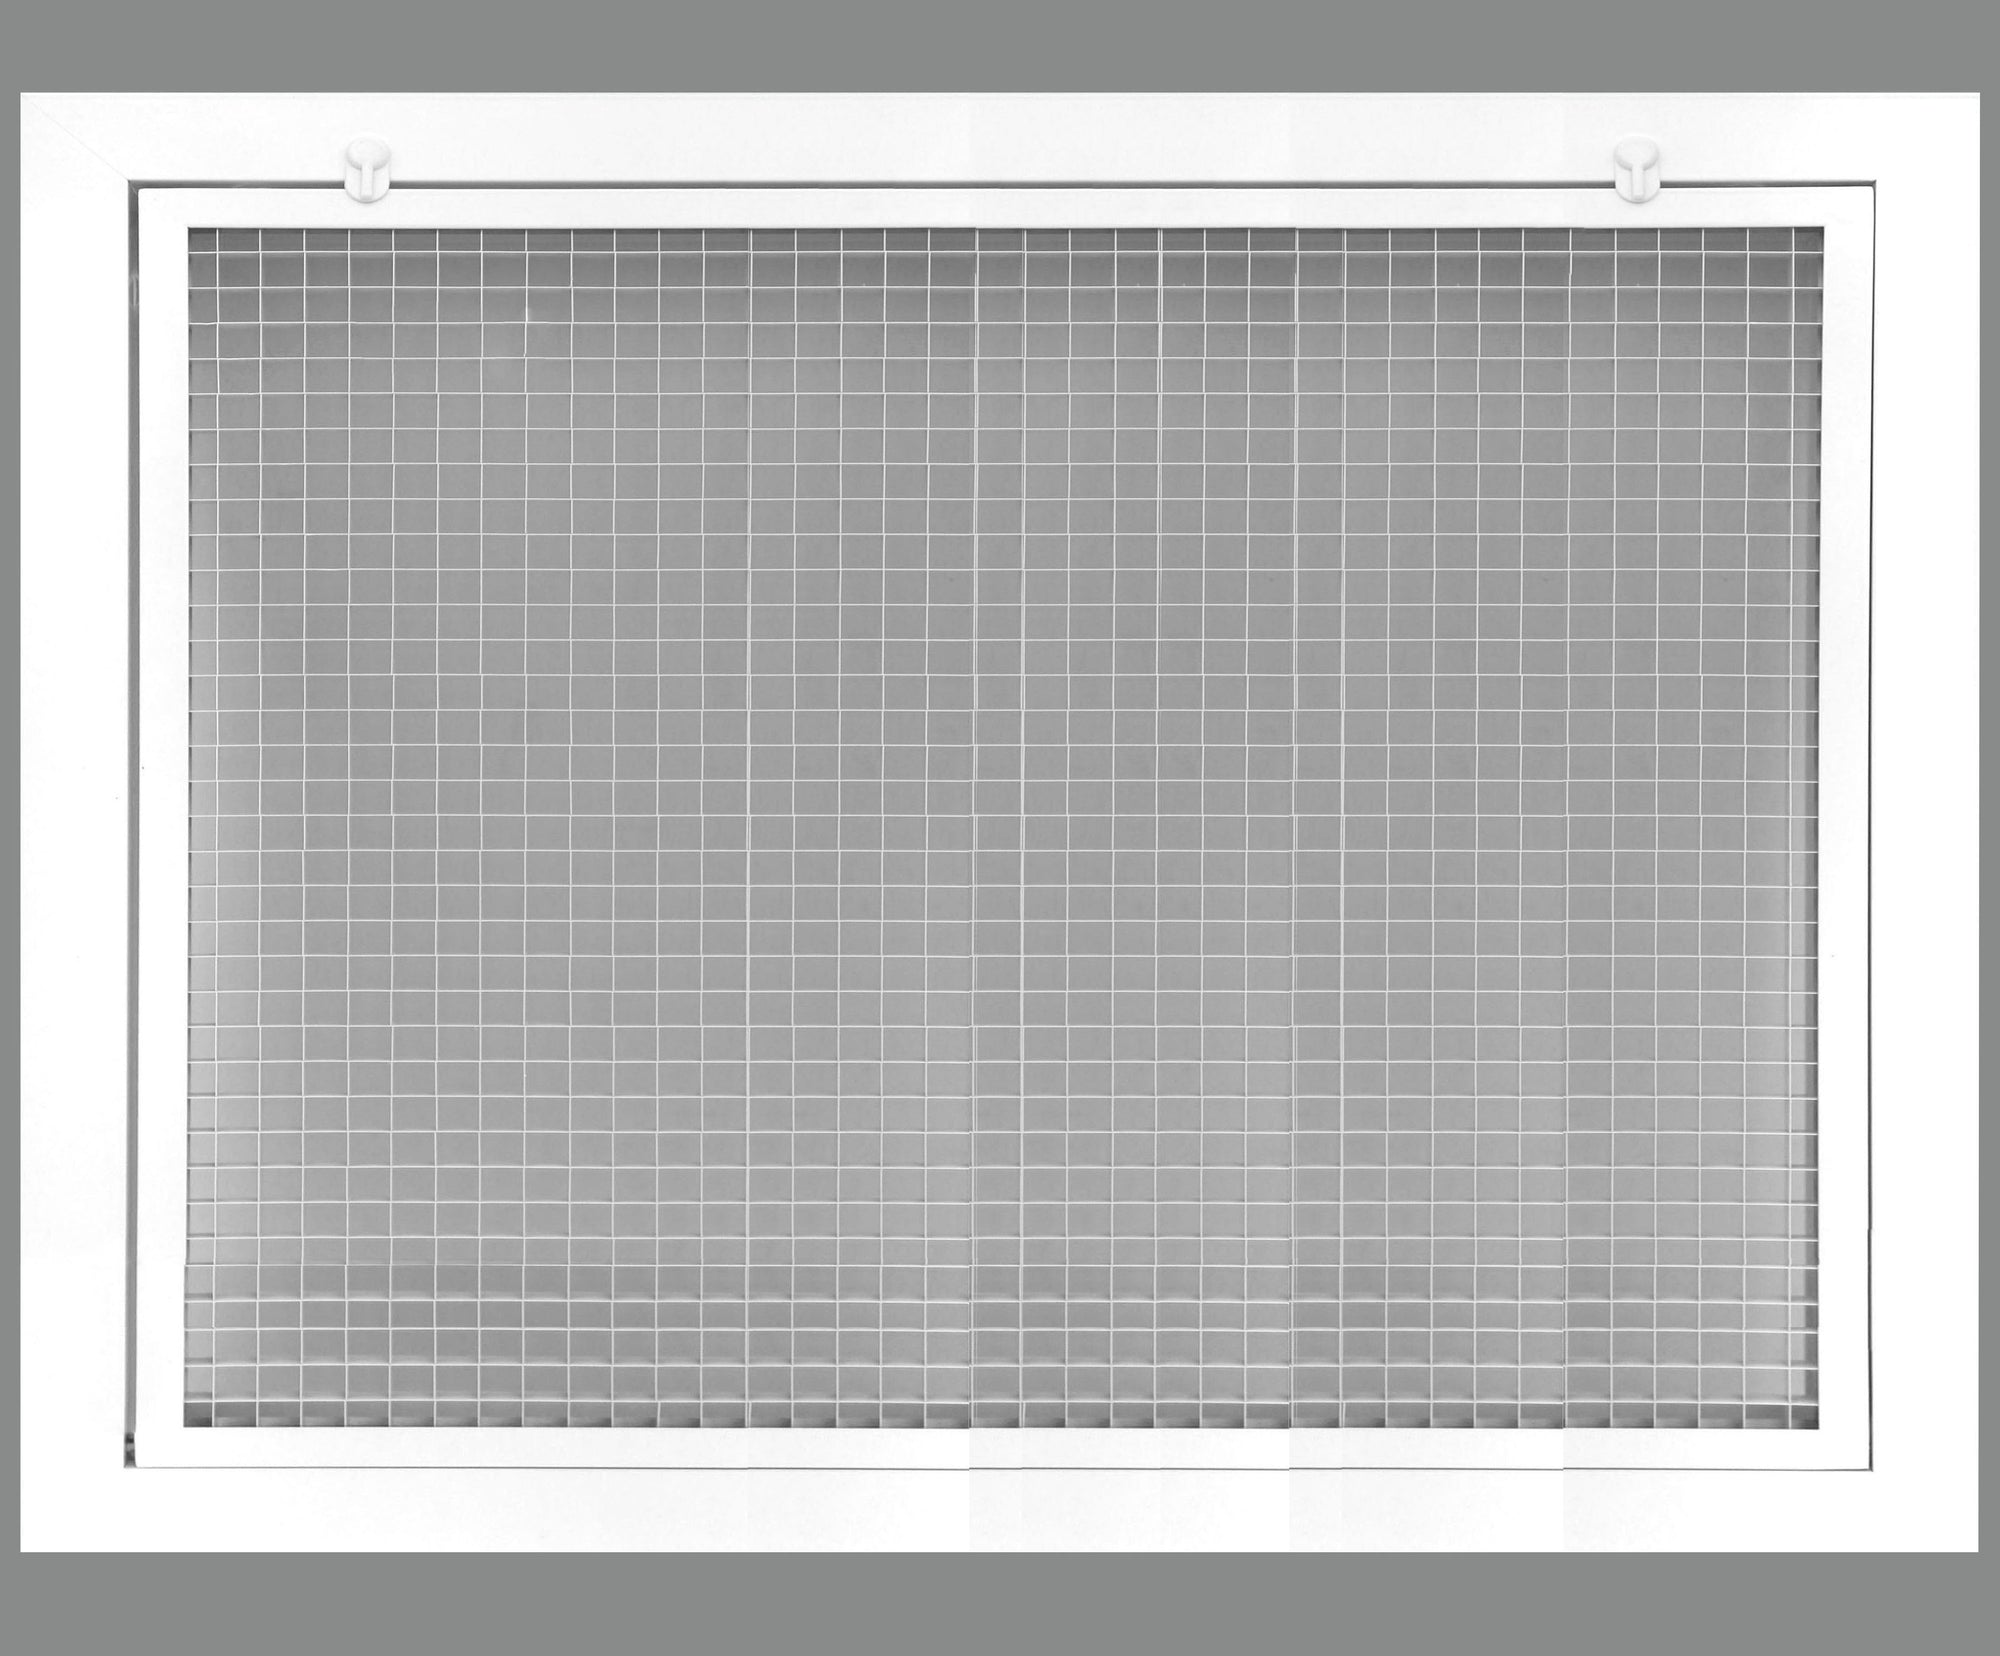 34" x 30" Cube Core Eggcrate Return Air Filter Grille for 1" Filter